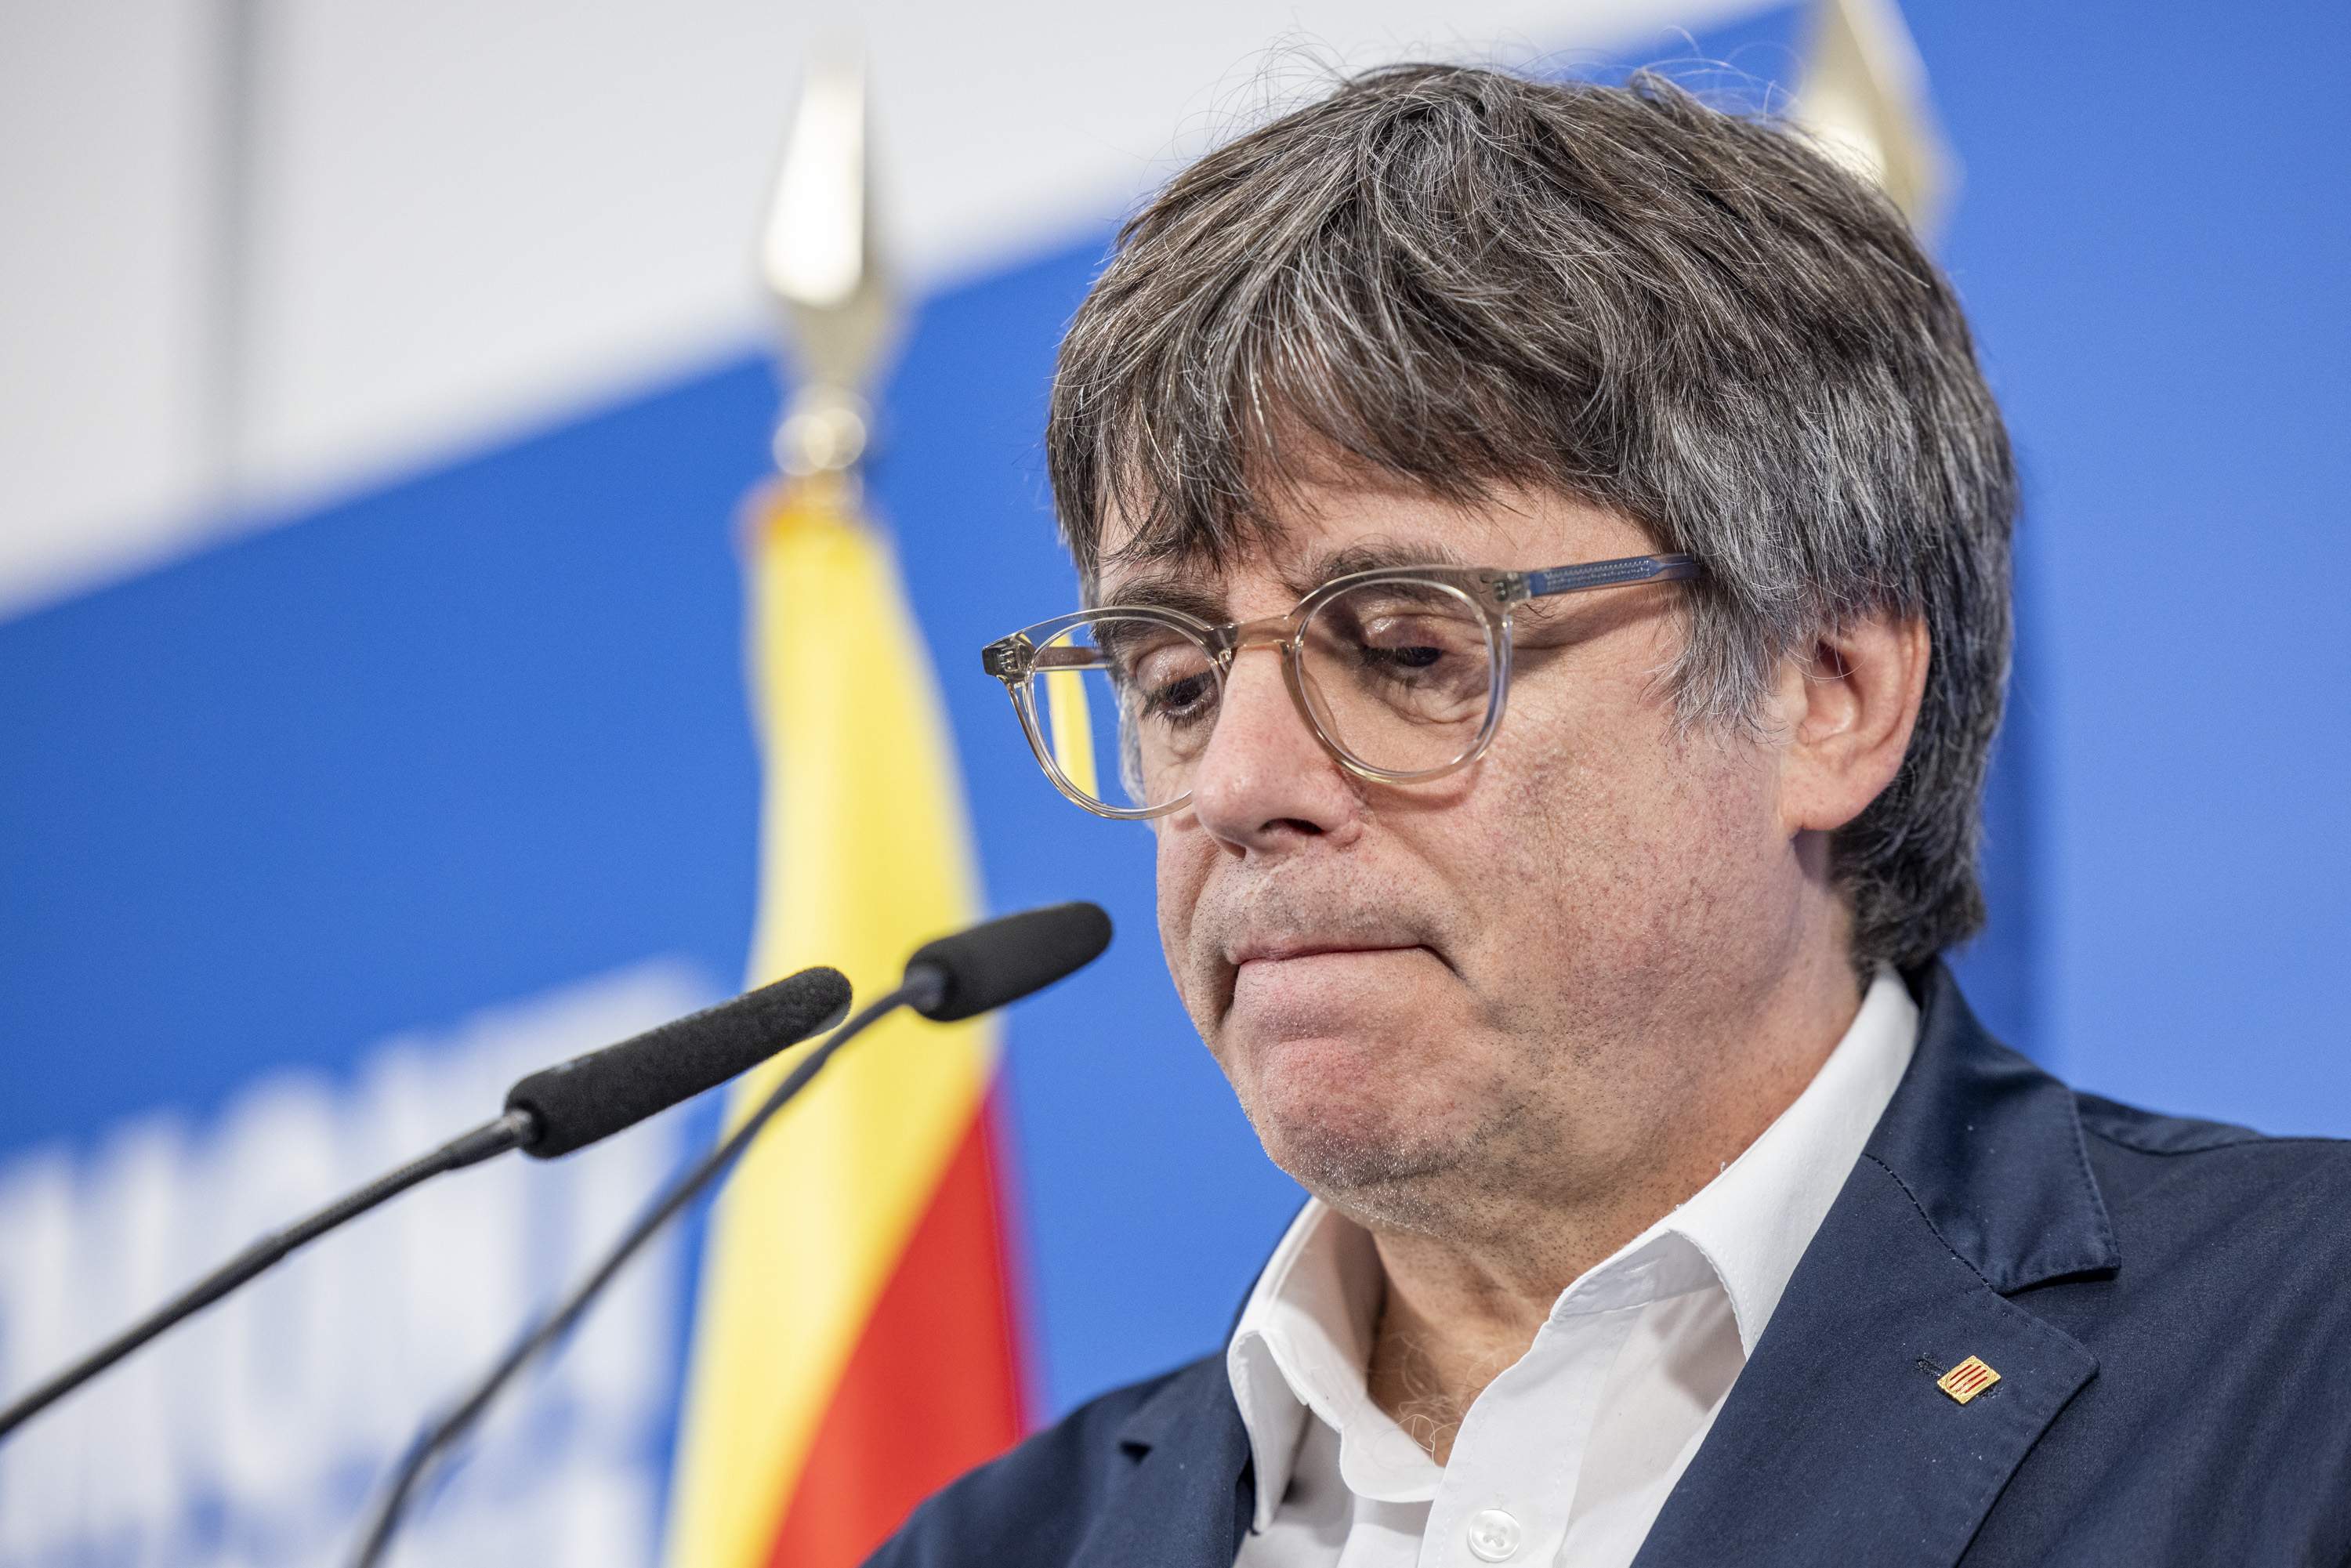 Puigdemont: "Catalan exile will not end due to EU efforts, but to Sánchez's need for Junts votes"